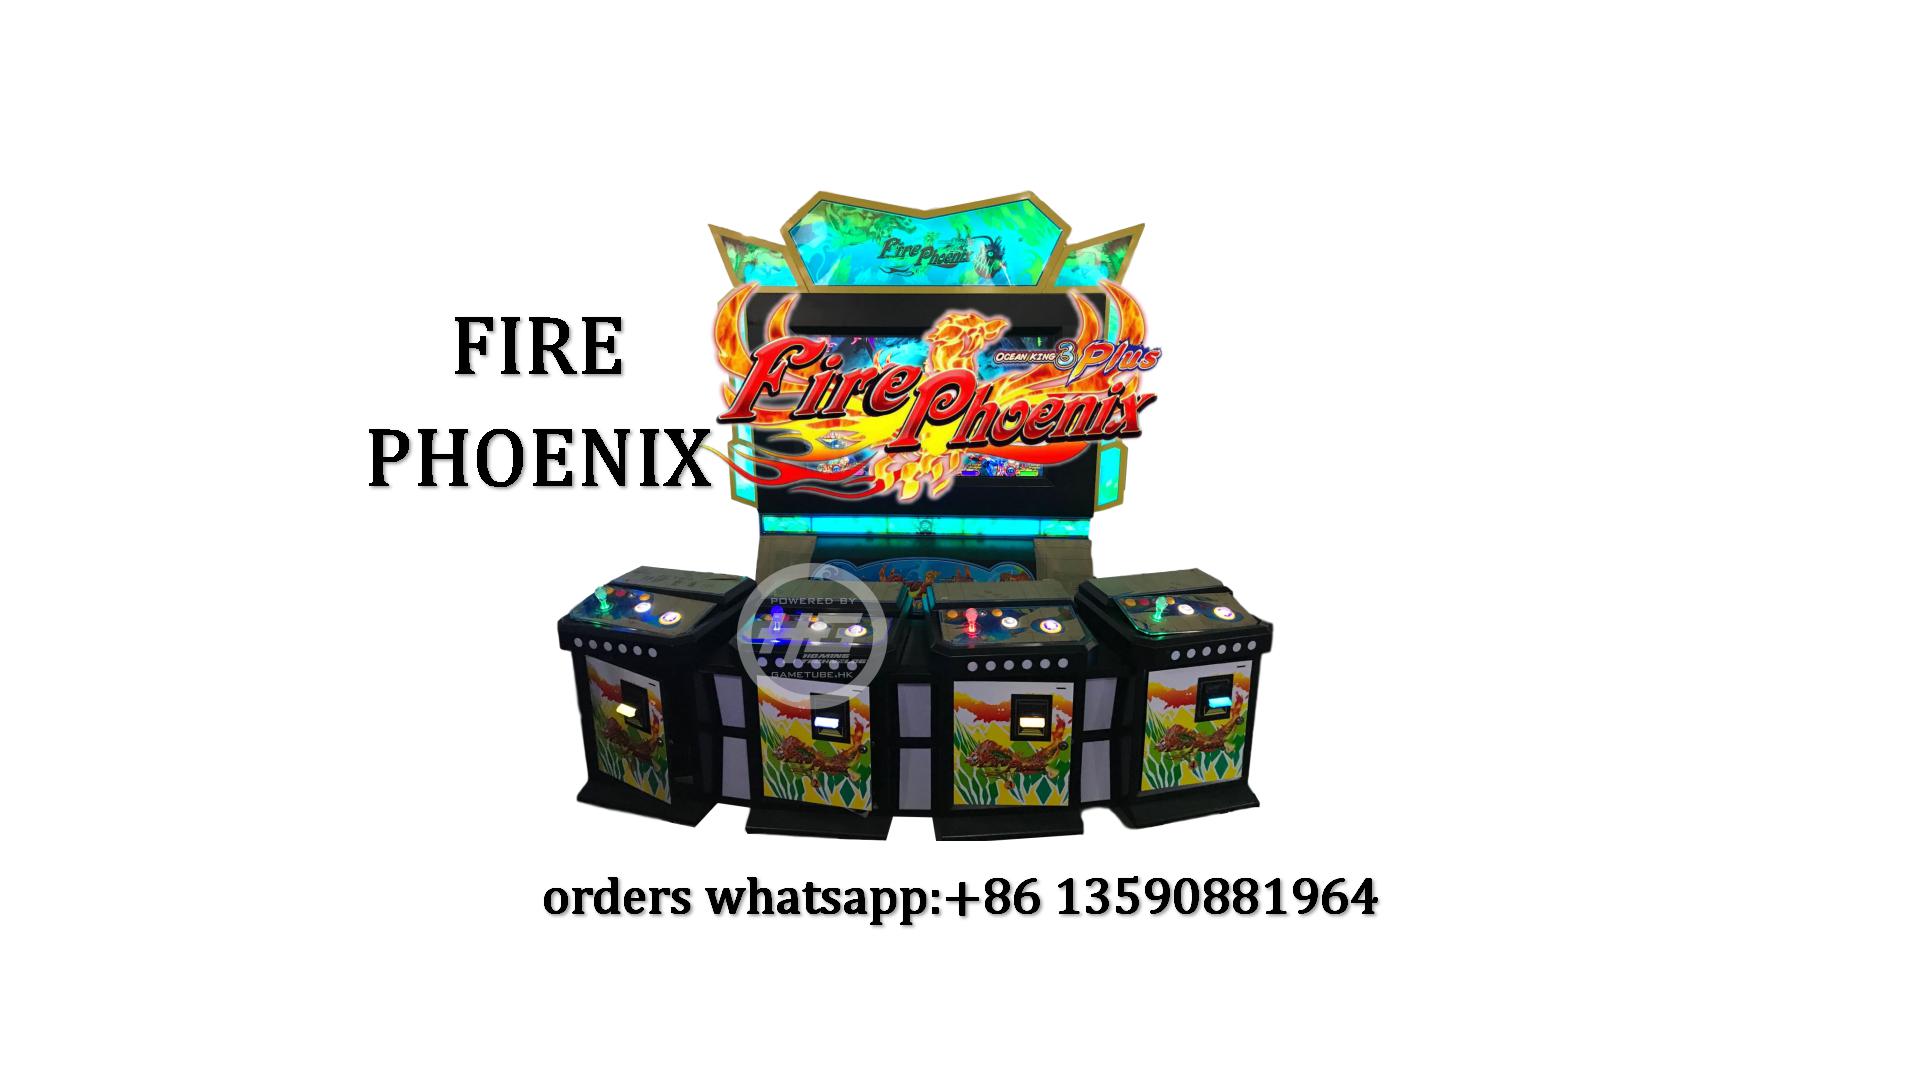 IGS Original Ocean King 3 Plus Fire Phoenix Fishing Game,4 Players Upright Fish Game Machine For Sale